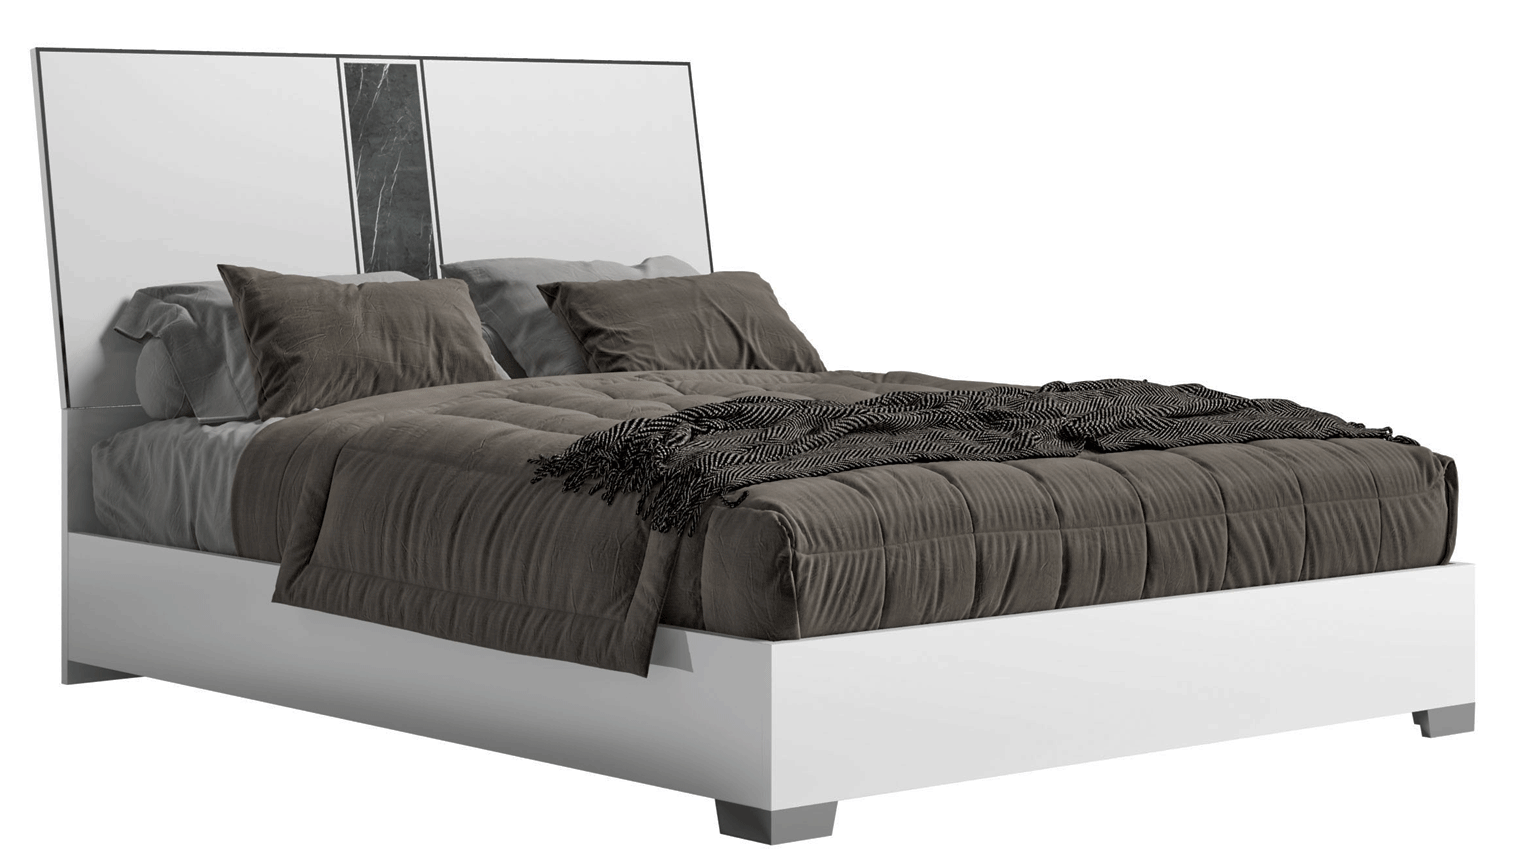 Clearance Bedroom Bianca Marble Bed